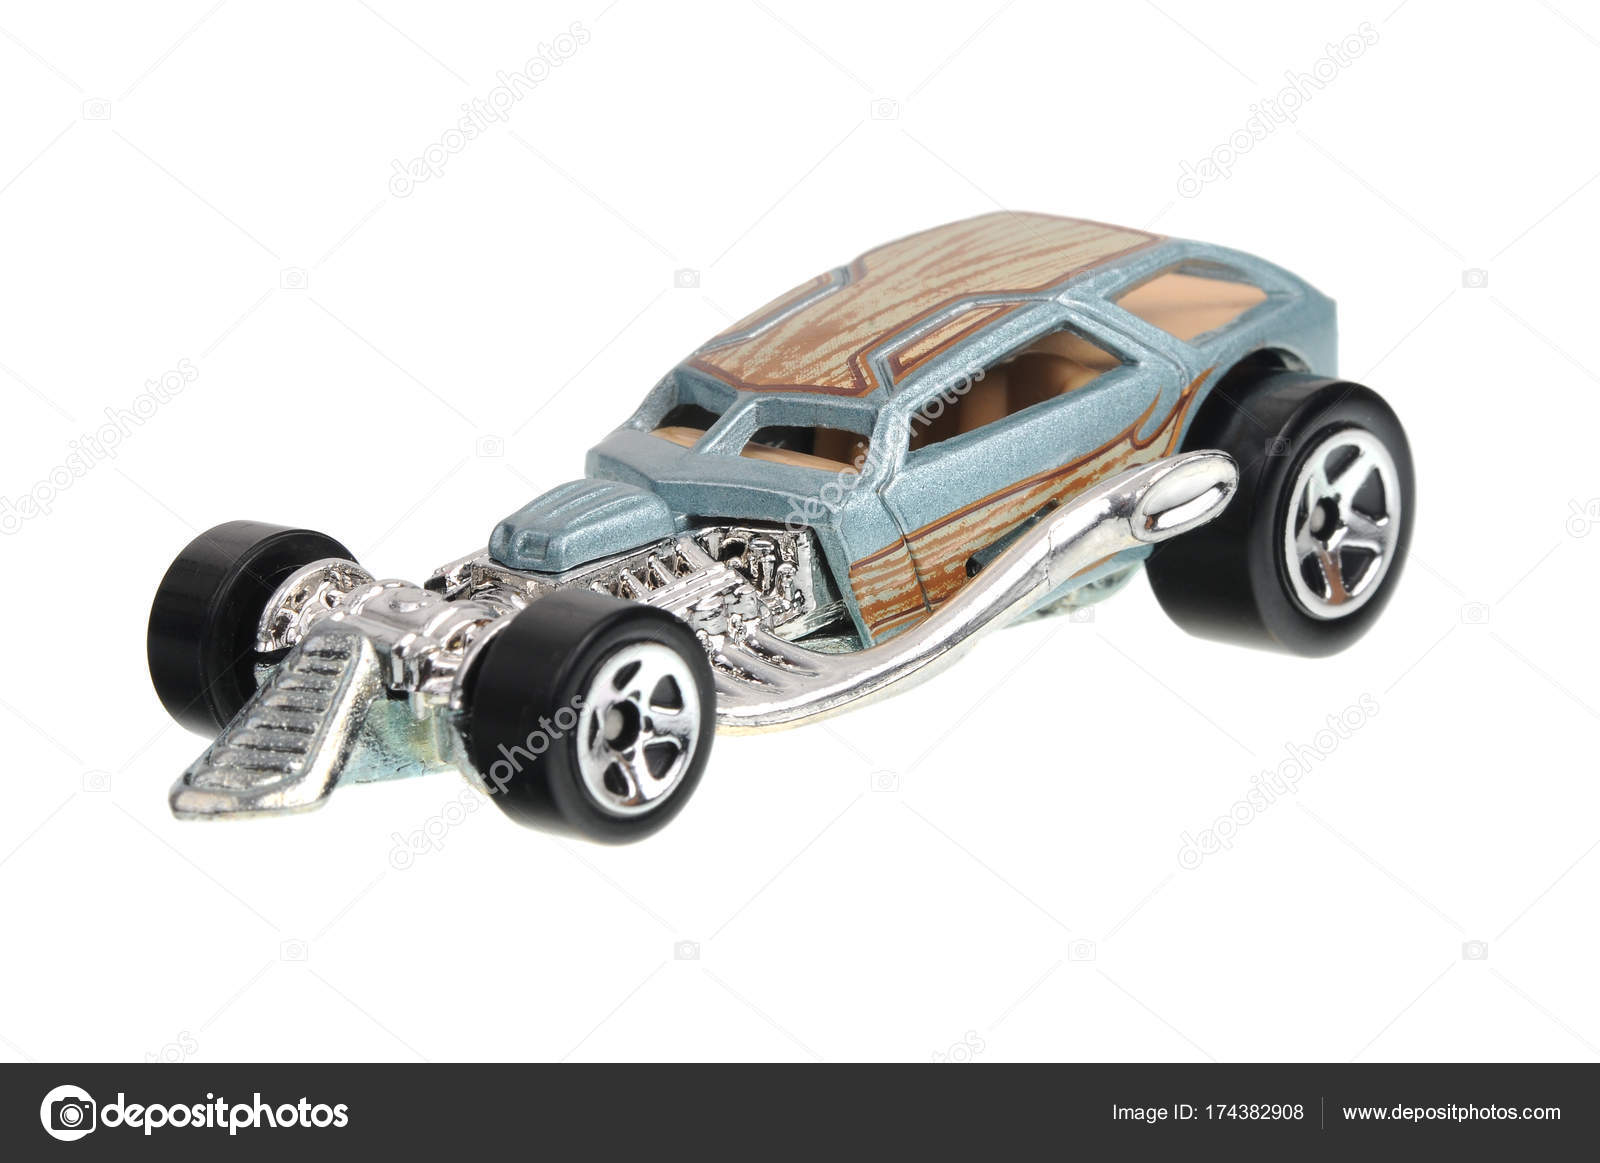 hot wheels surf crate